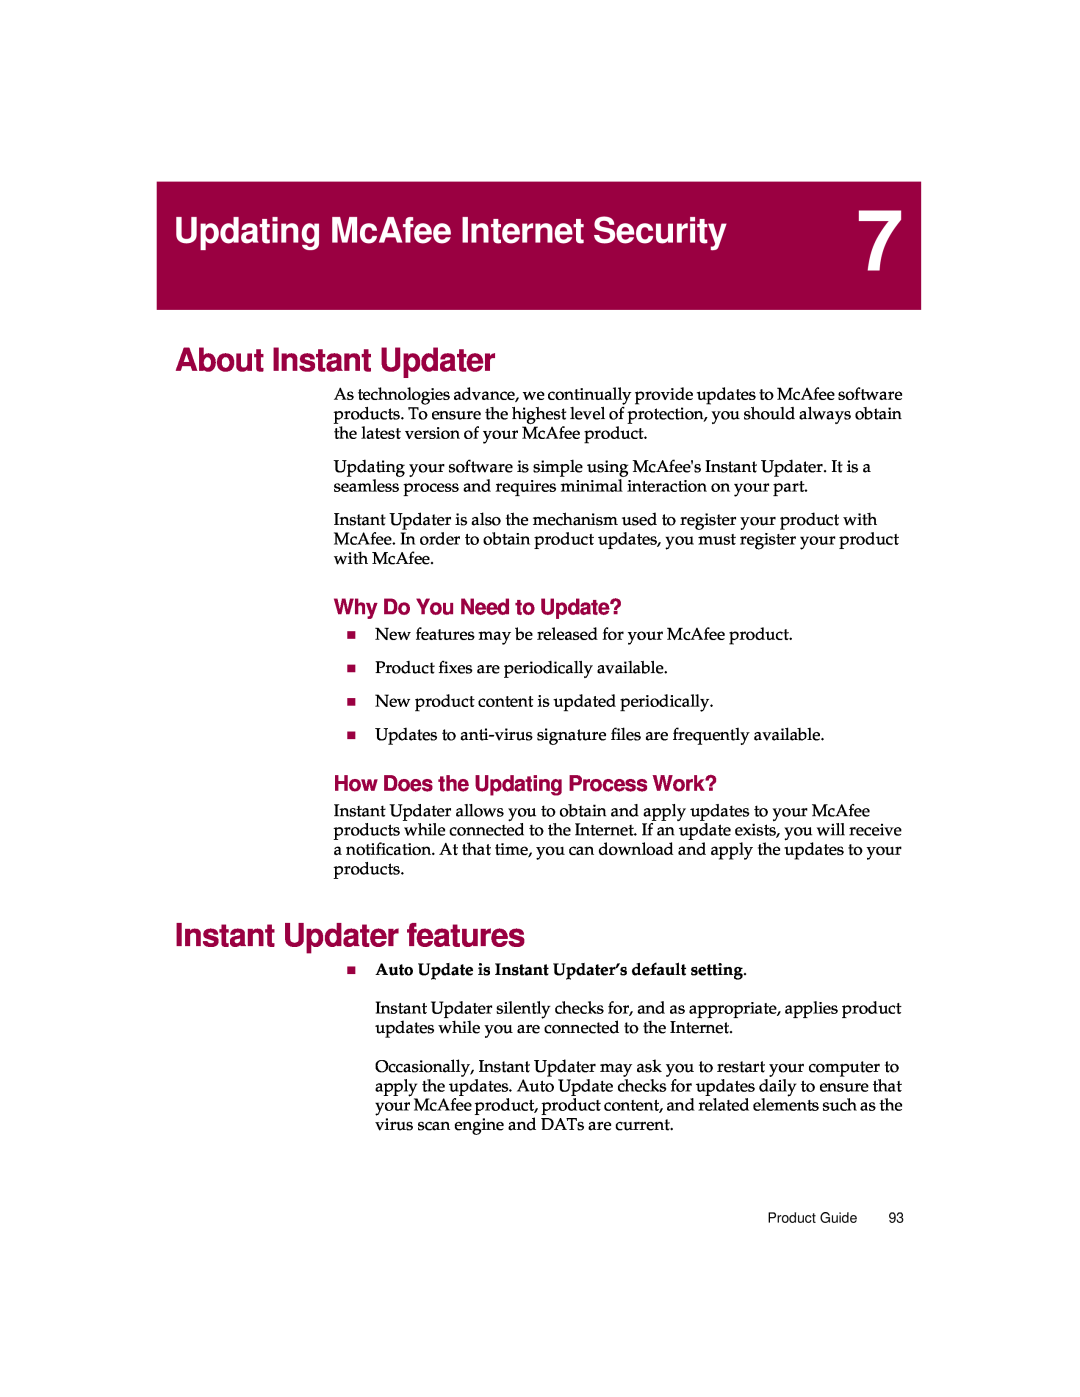 McAfee 5 Updating McAfee Internet Security, About Instant Updater, Instant Updater features, Why Do You Need to Update? 